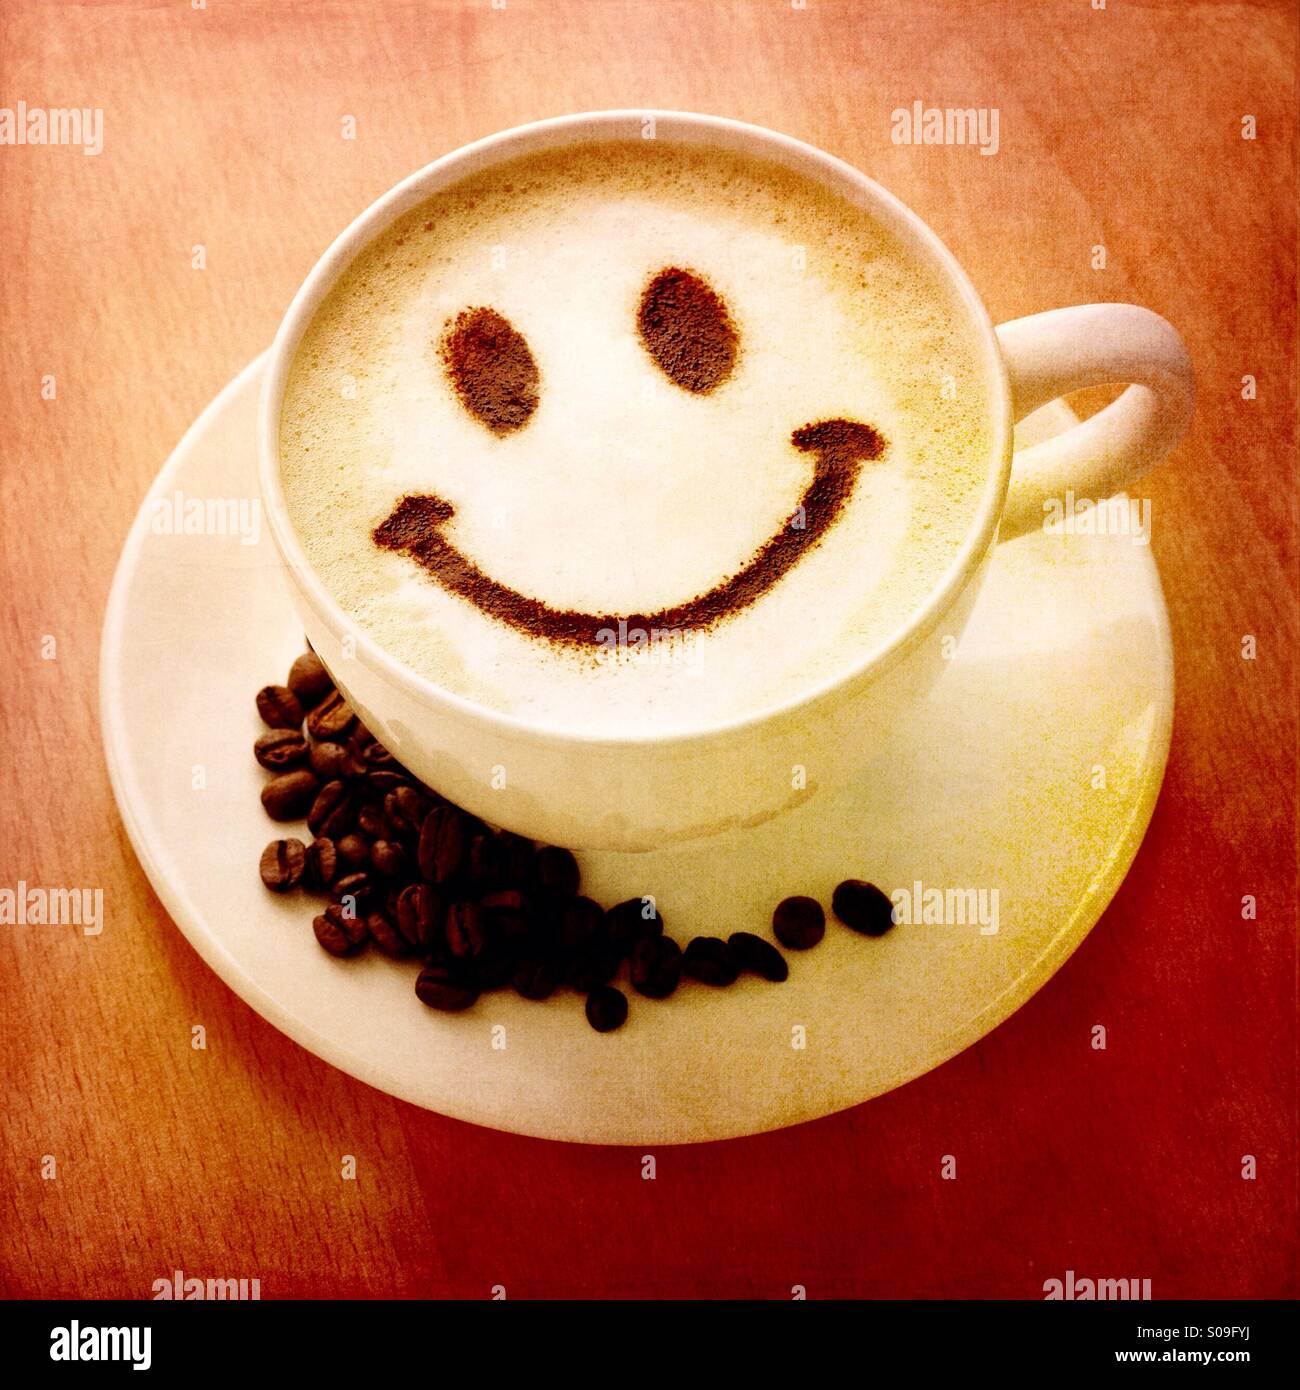 https://c8.alamy.com/comp/S09FYJ/a-warming-cup-of-hot-coffee-with-a-chocolate-powder-smiley-face-S09FYJ.jpg